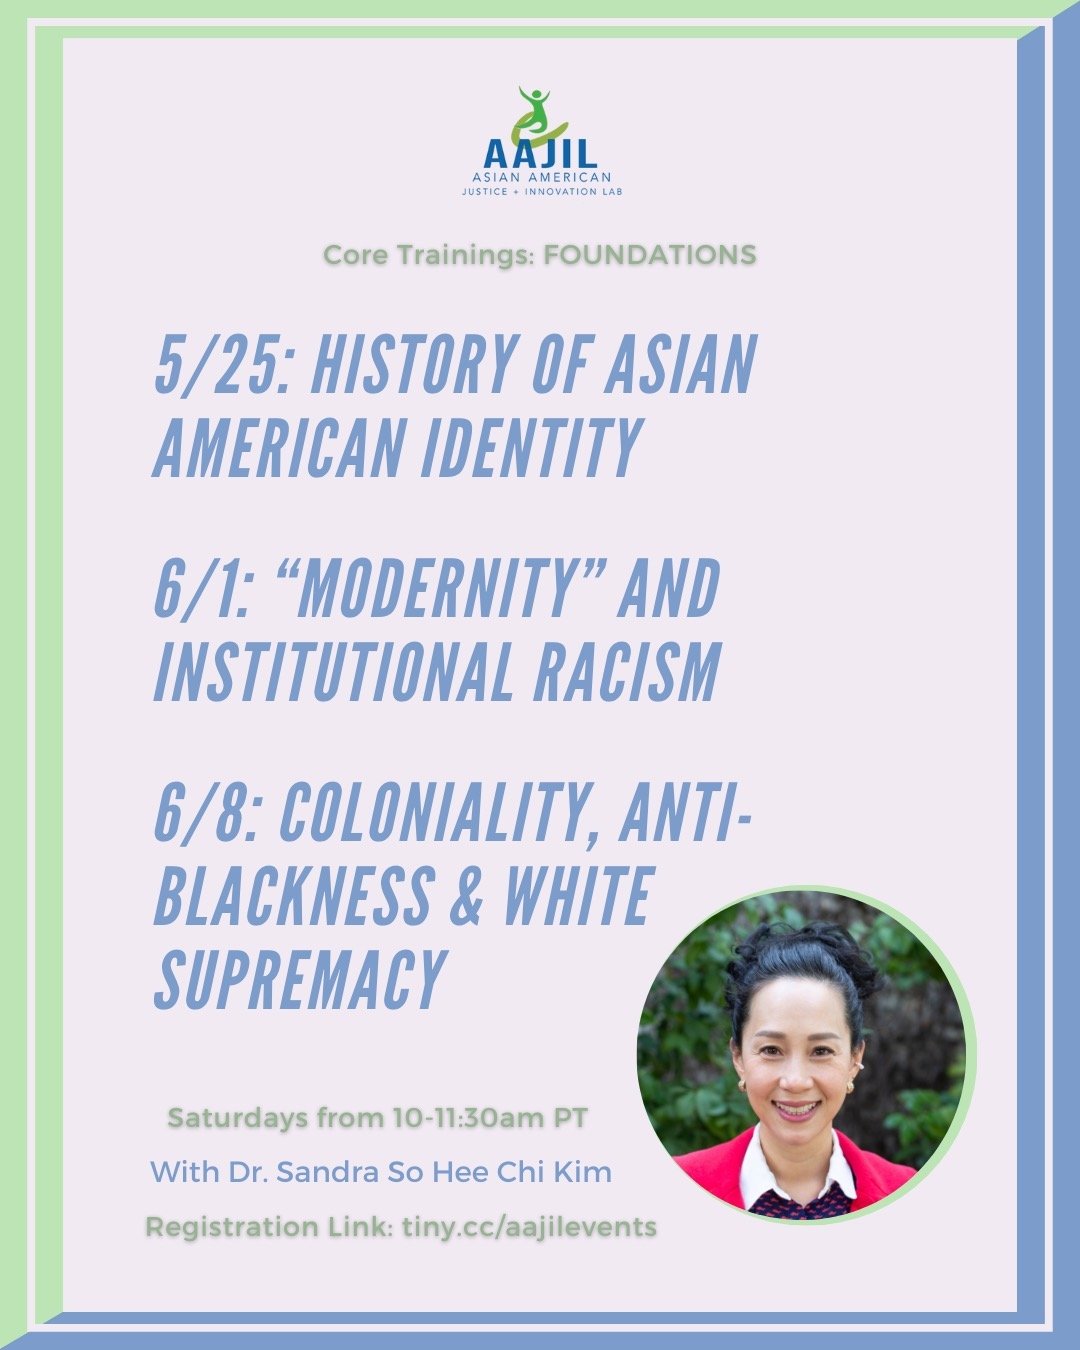 Following our Fundamentals level of workshops called &ldquo;Connecting Histories,&rdquo; we&rsquo;ll begin our Foundations level on Saturday, May 25th from 10:00am -11:30am PT with Dr. Sandy So Hee Chi Kim. ✨

Free! SIGN UP: Link in BIO or tiny.cc/aa